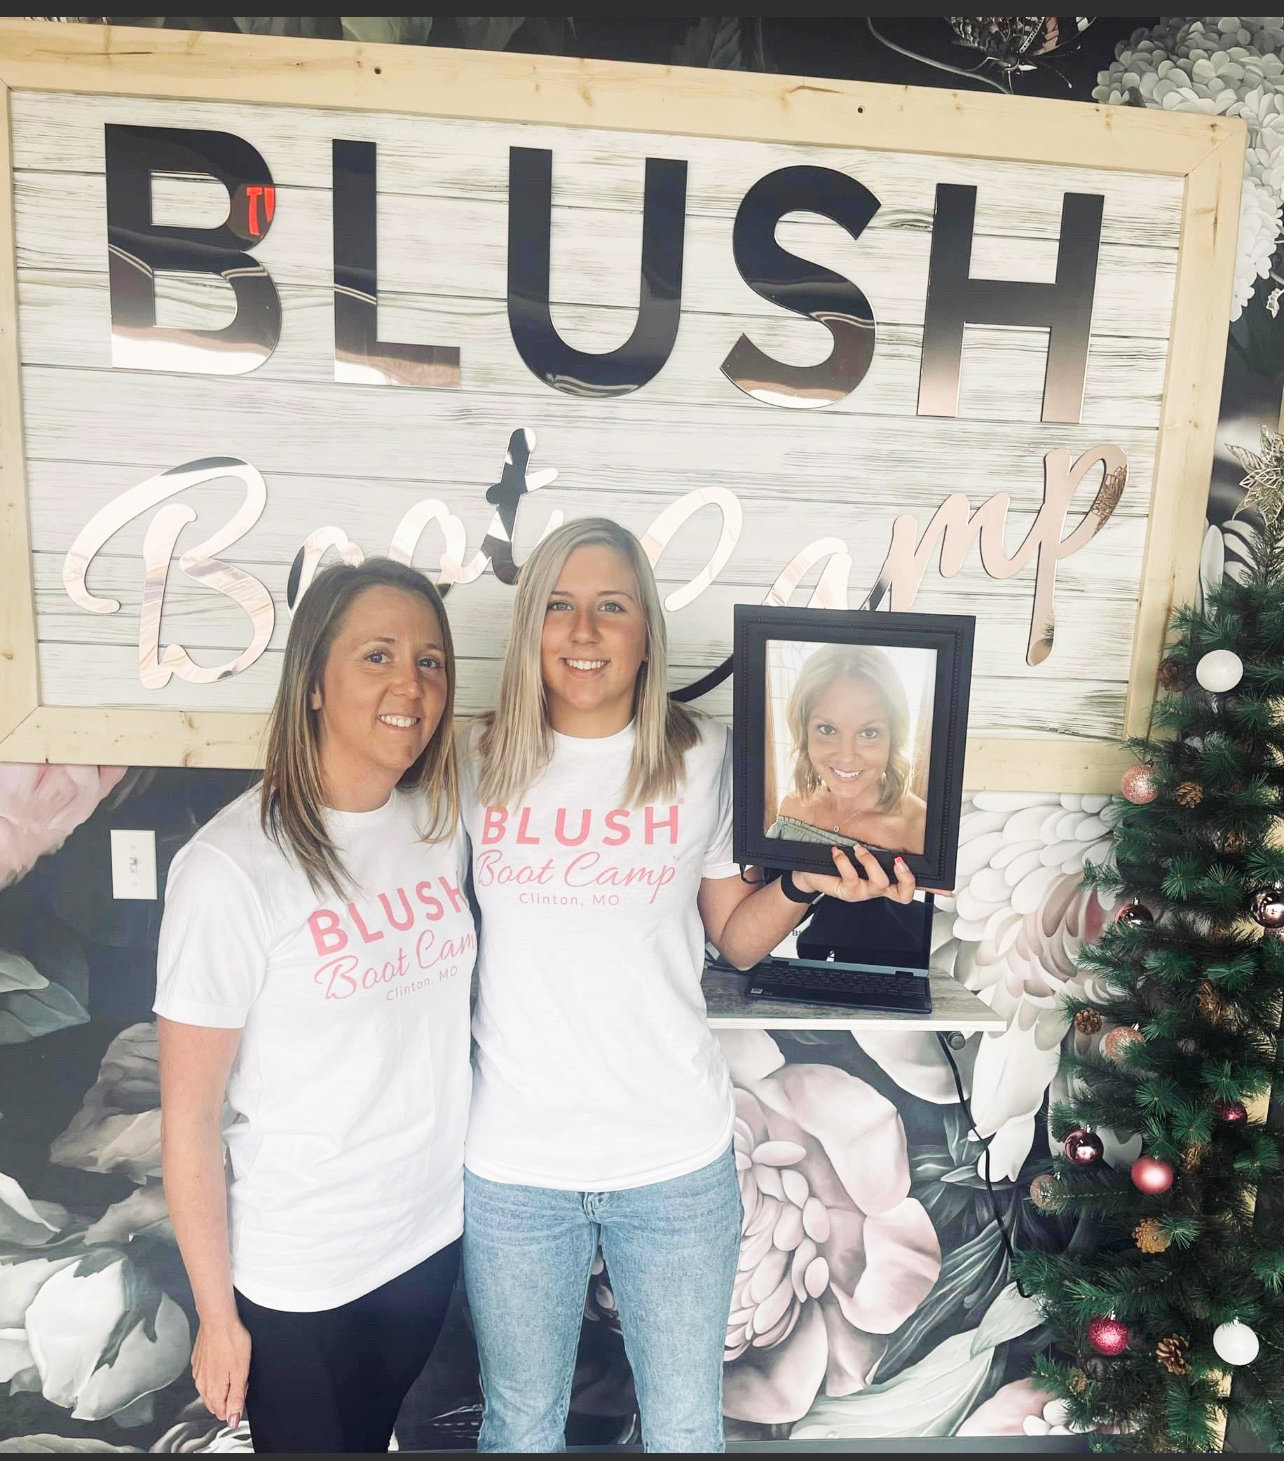 MOVING FORWARD WITH GRATITUDE, Charize Staley, and daughter Charlee honor the late Missy McCoy Moretine who served as Charize’s business partner in Blush Boot Camp.